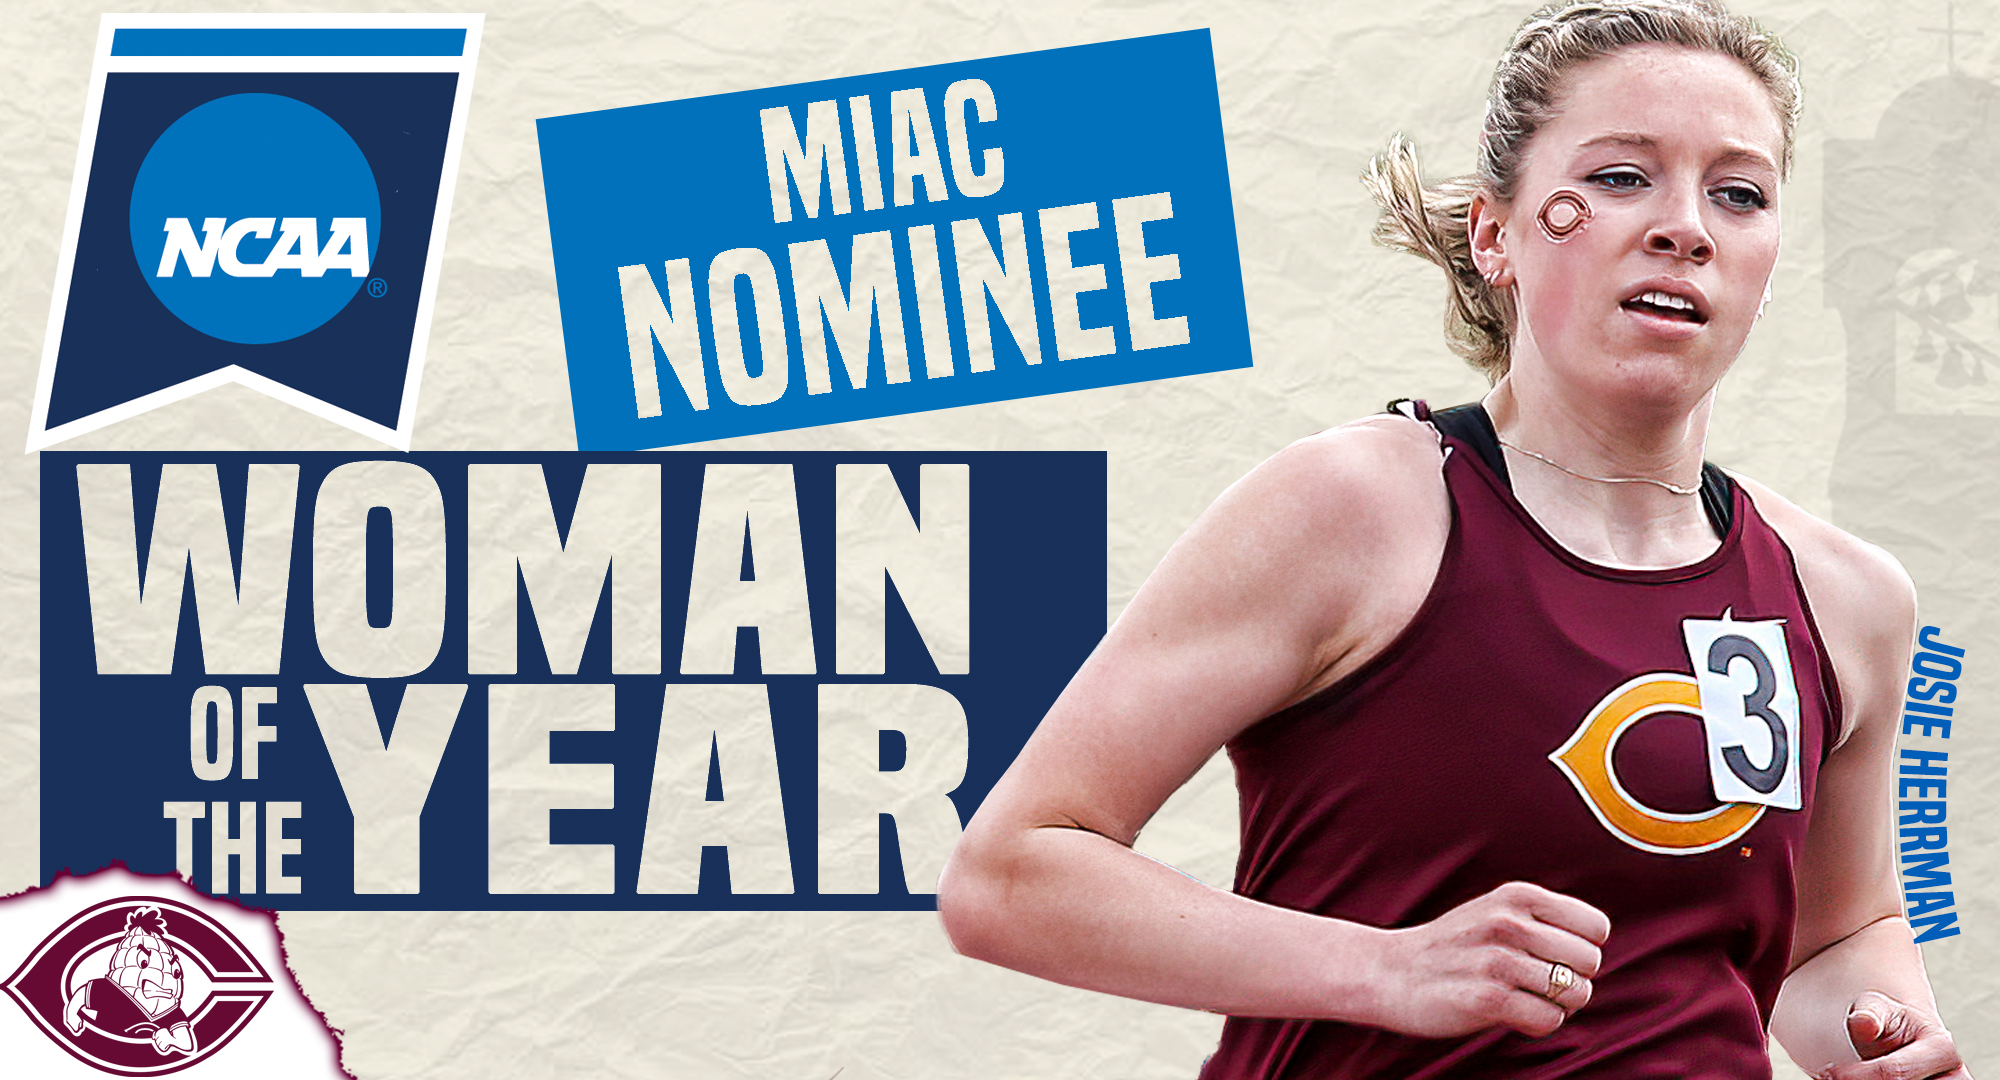 Josie Herrmann (New Prague, Minn.) was selected as one of two nominees from the MIAC to serve as the conference’s choices for the NCAA Woman of the Year award.